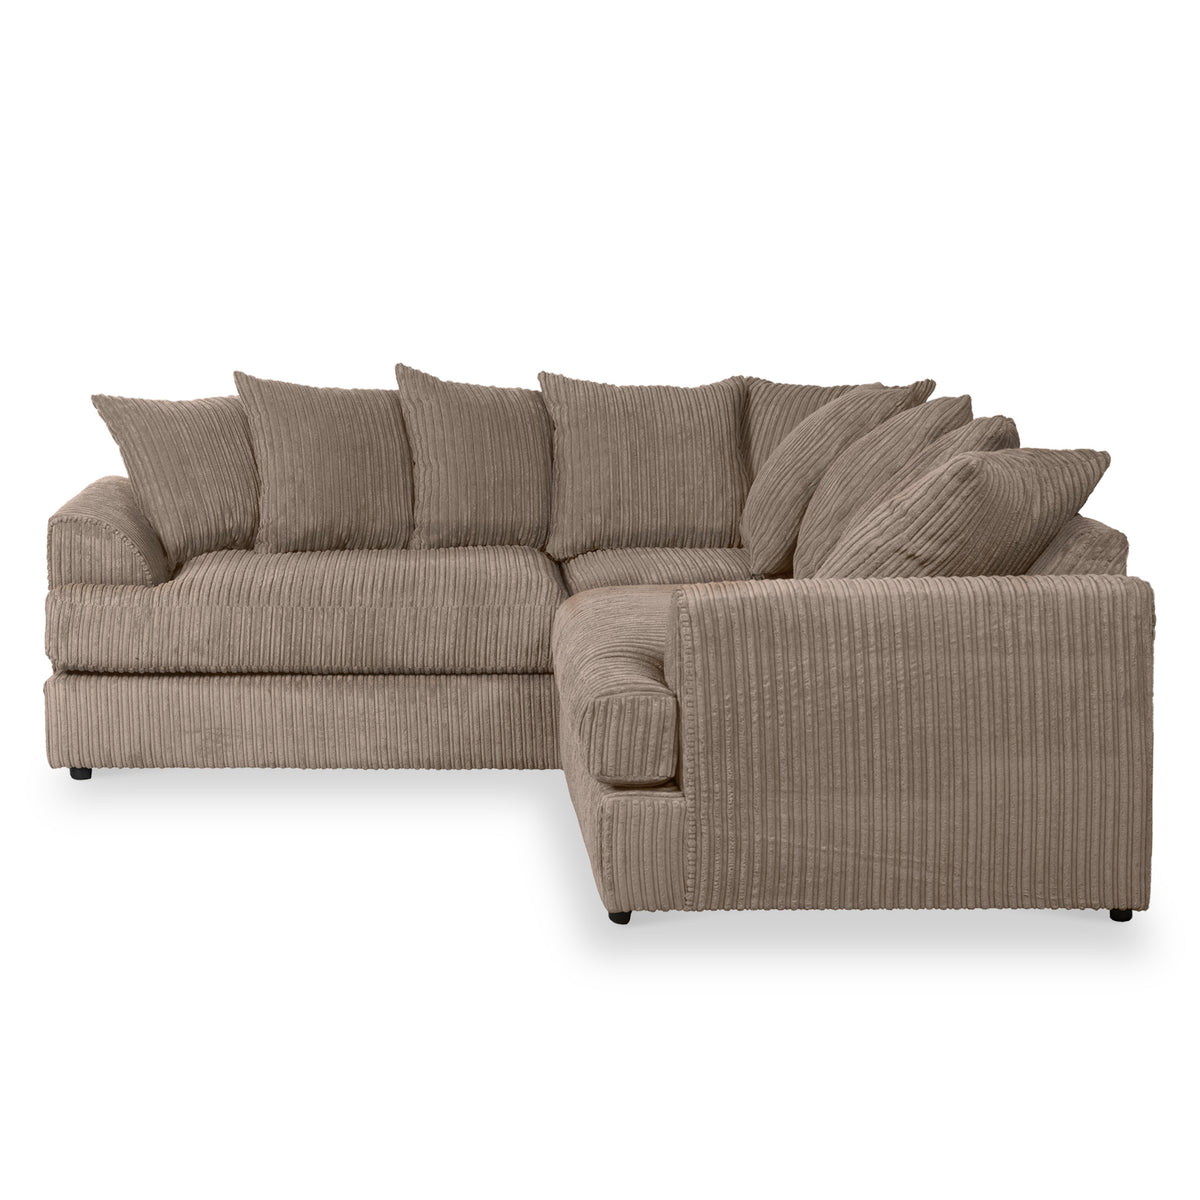 Bletchley Coffee Jumbo Cord Corner Couch from Roseland Furniture